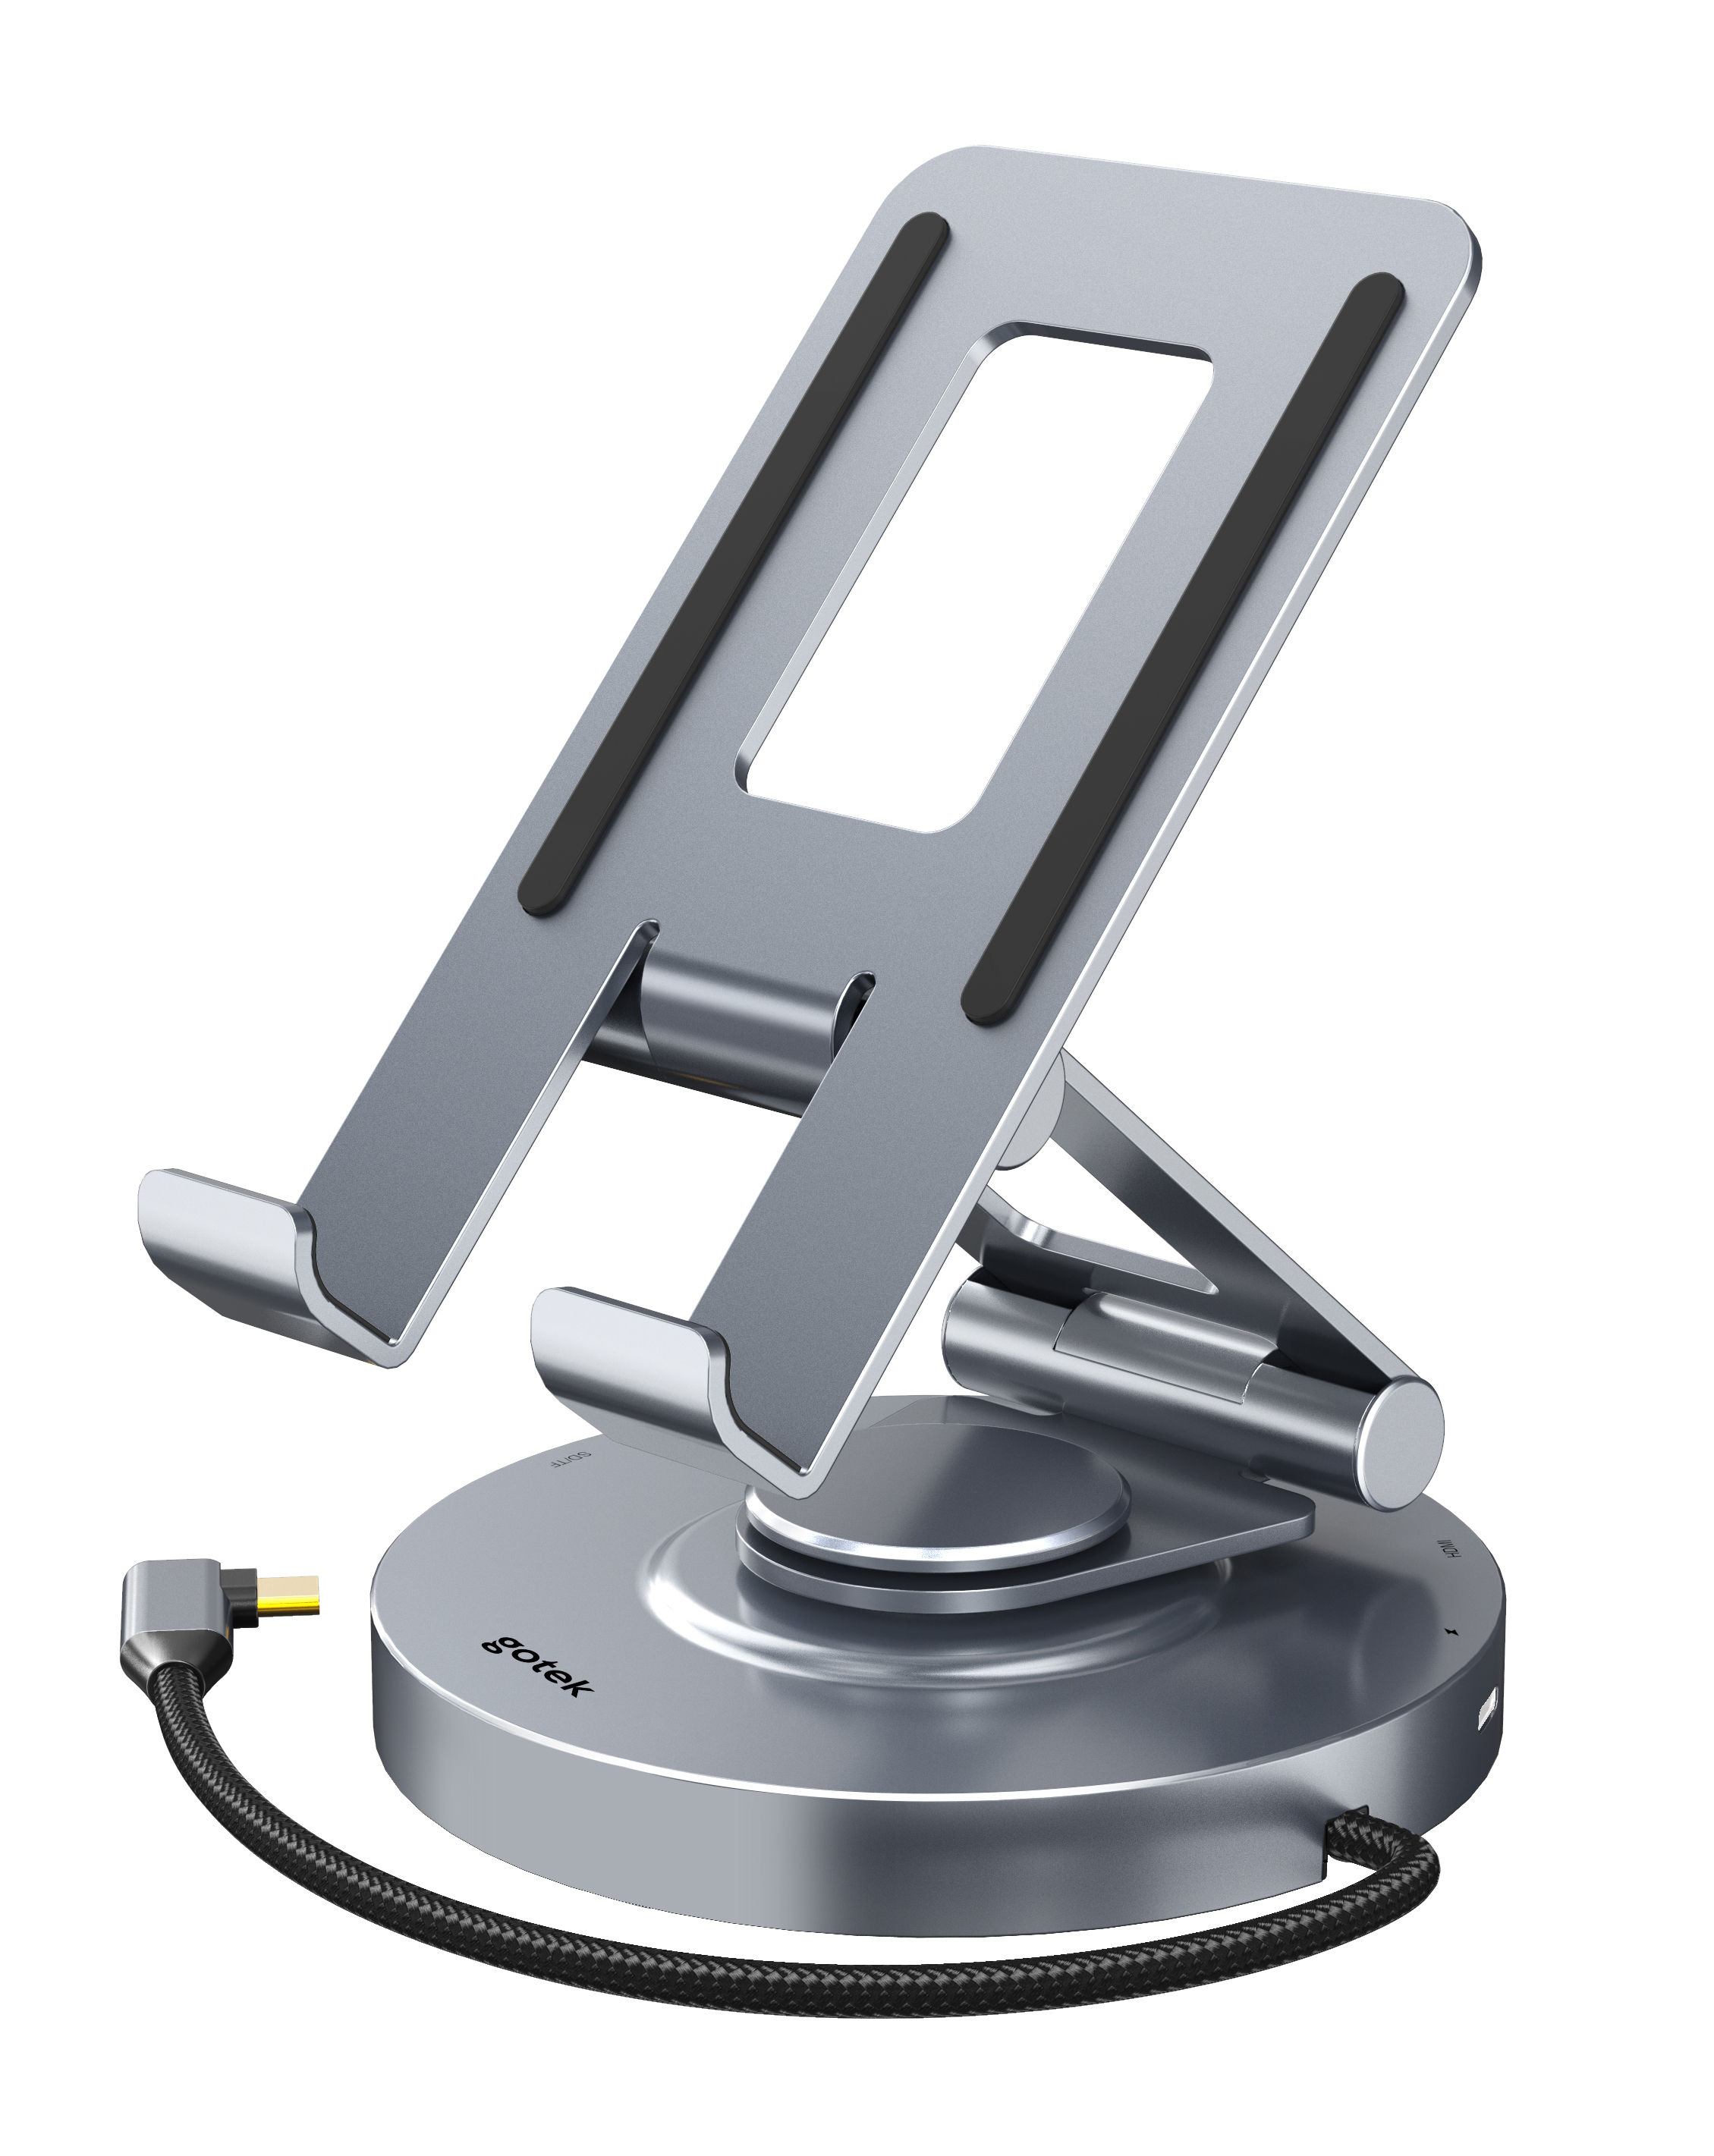 GOTEK Swivel Tablet Stand With Extension Hub